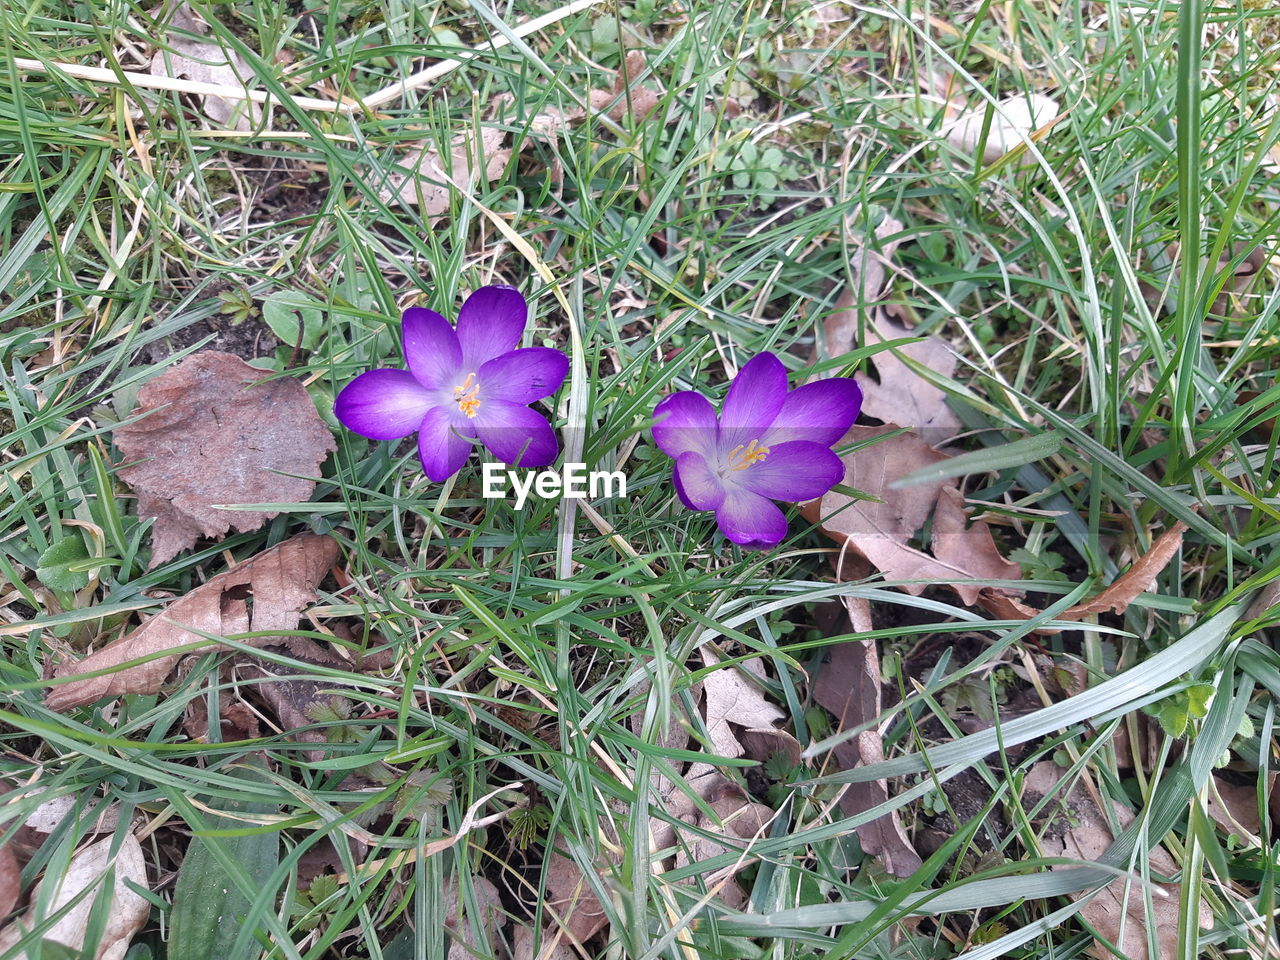 plant, flowering plant, flower, growth, freshness, beauty in nature, fragility, nature, purple, grass, field, land, high angle view, petal, iris, crocus, day, no people, inflorescence, flower head, close-up, green, wildflower, outdoors, leaf, plant part